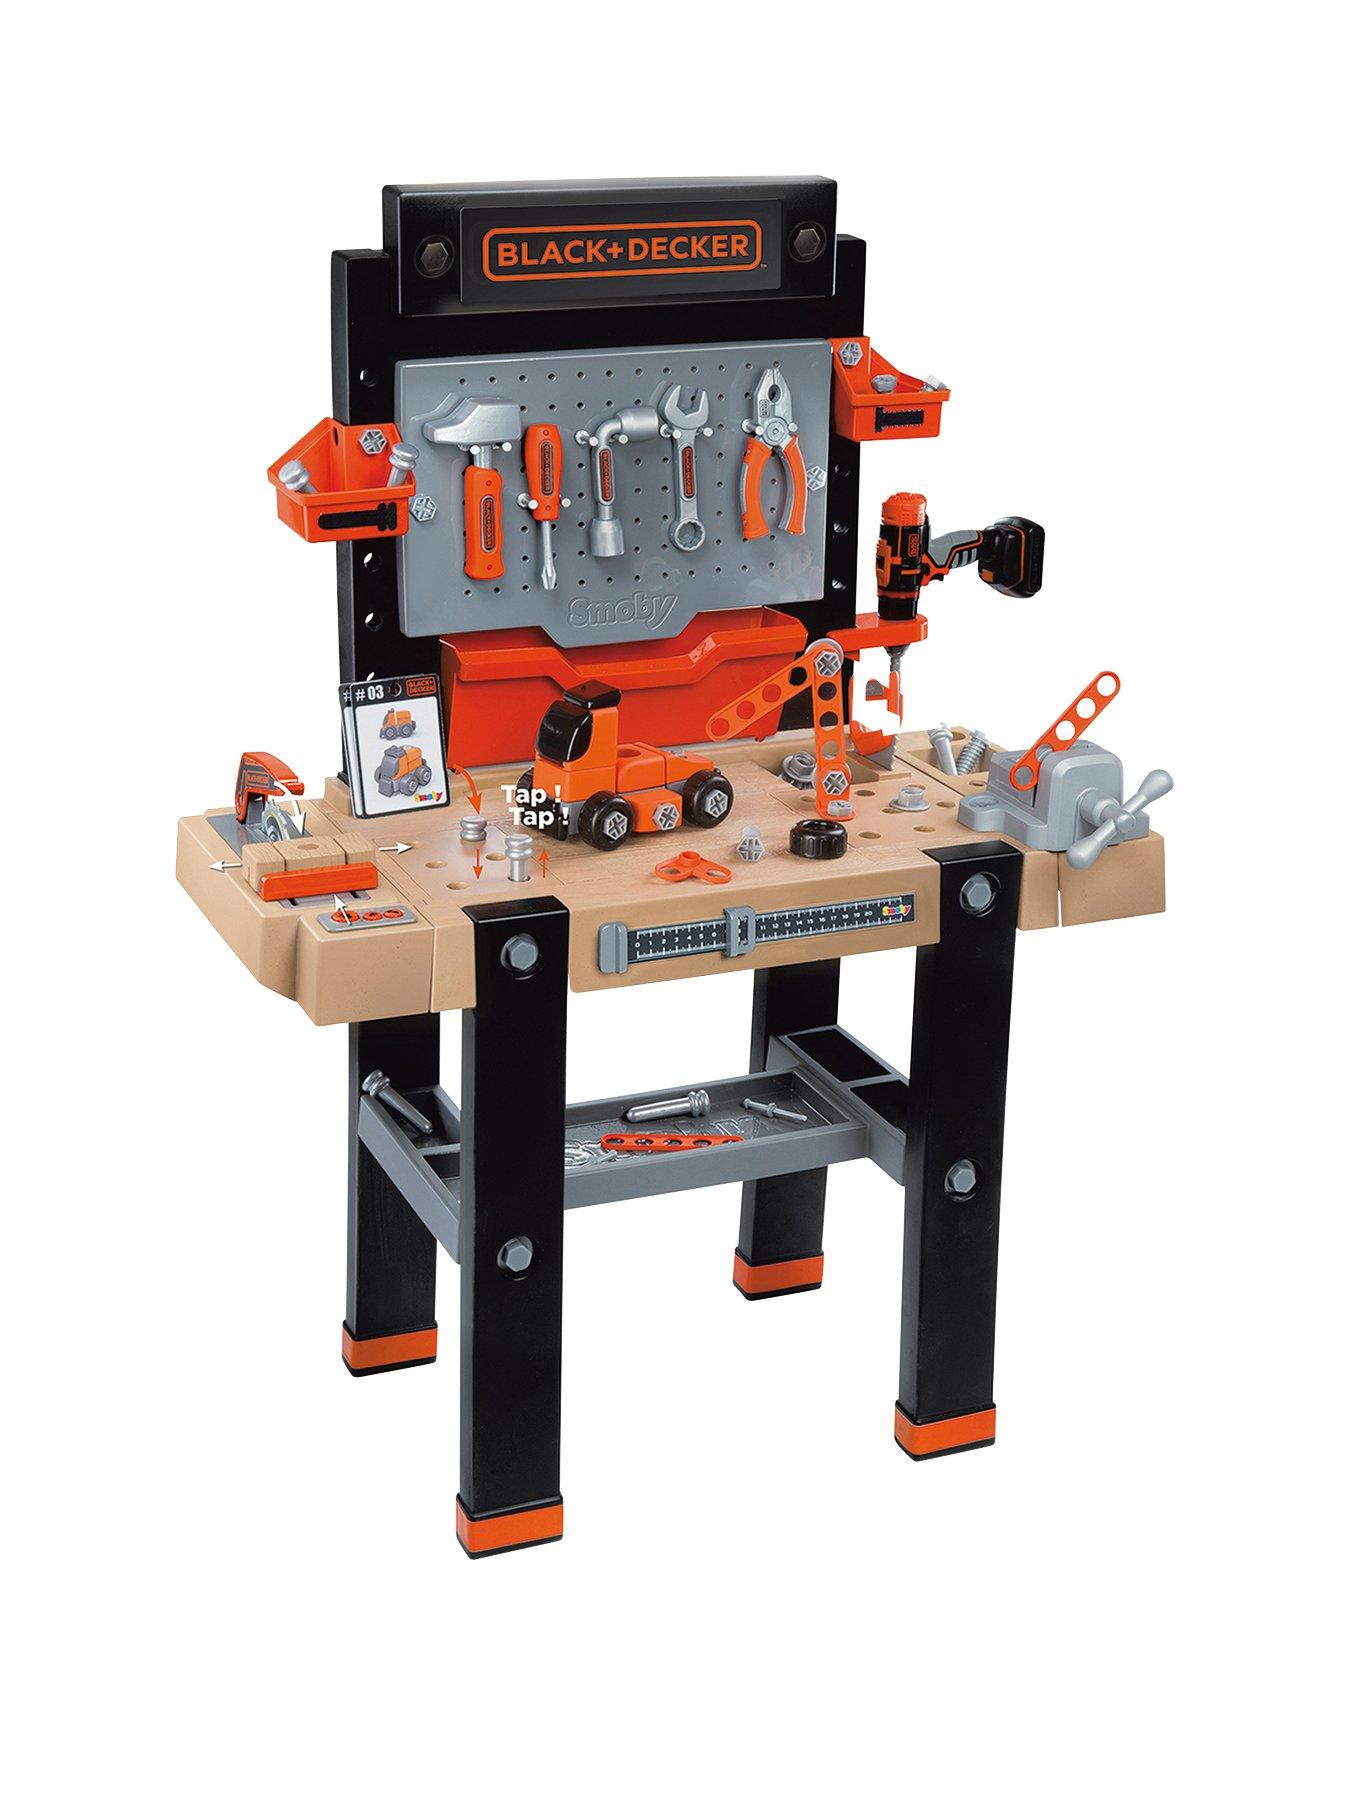 BLACK+DECKER Junior Ready-to-Build Work Bench with 53 Tool and Accessories  - Suggested Age: 3 Years and Up